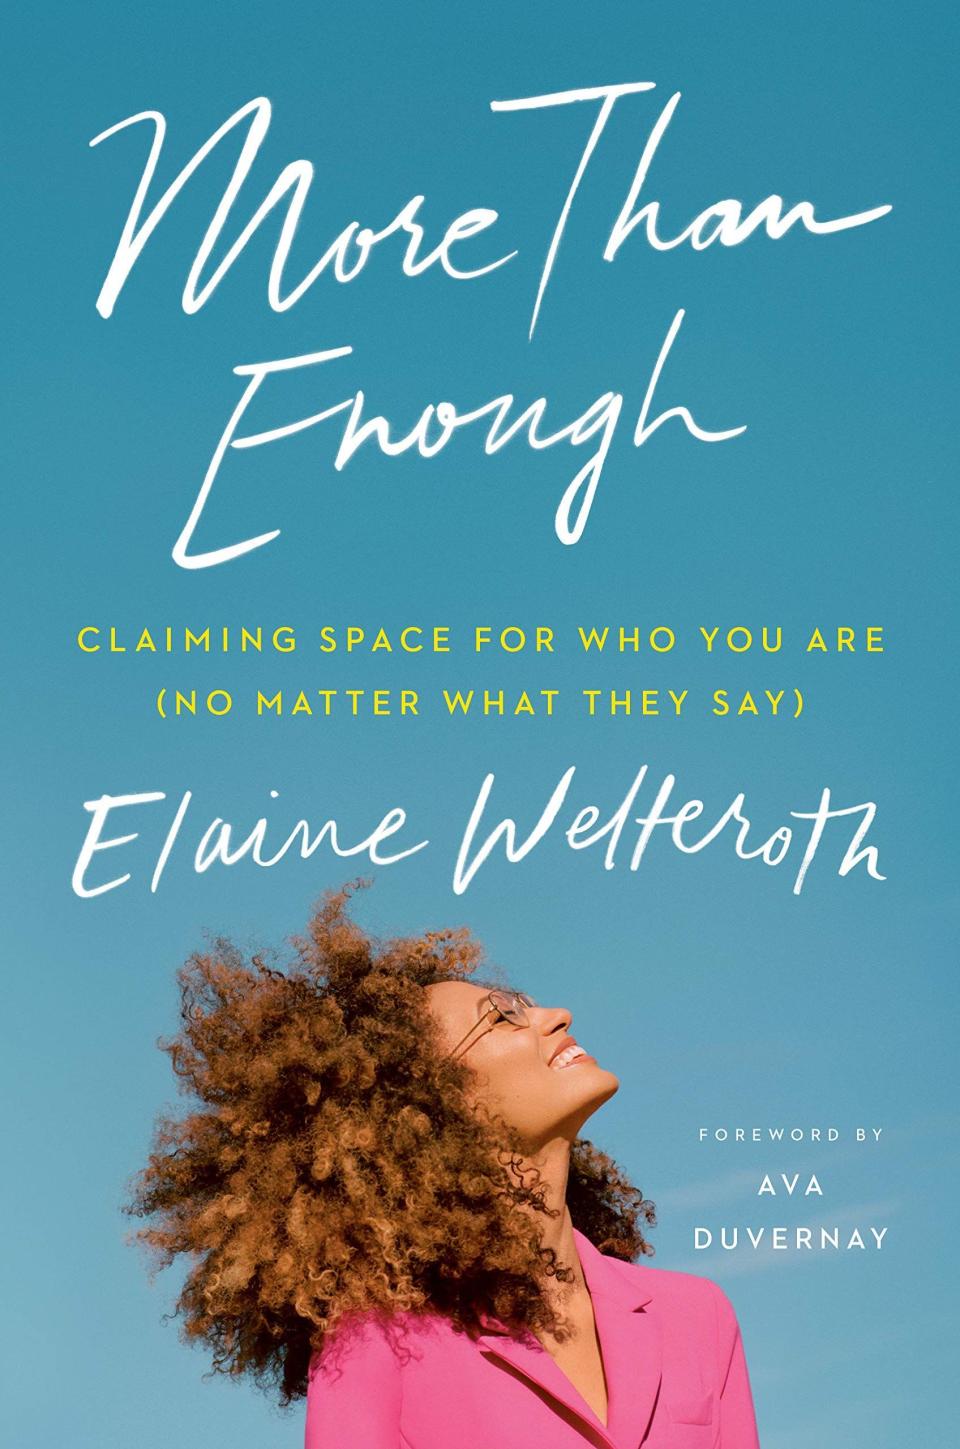 9) 'More Than Enough' by Elaine Welteroth